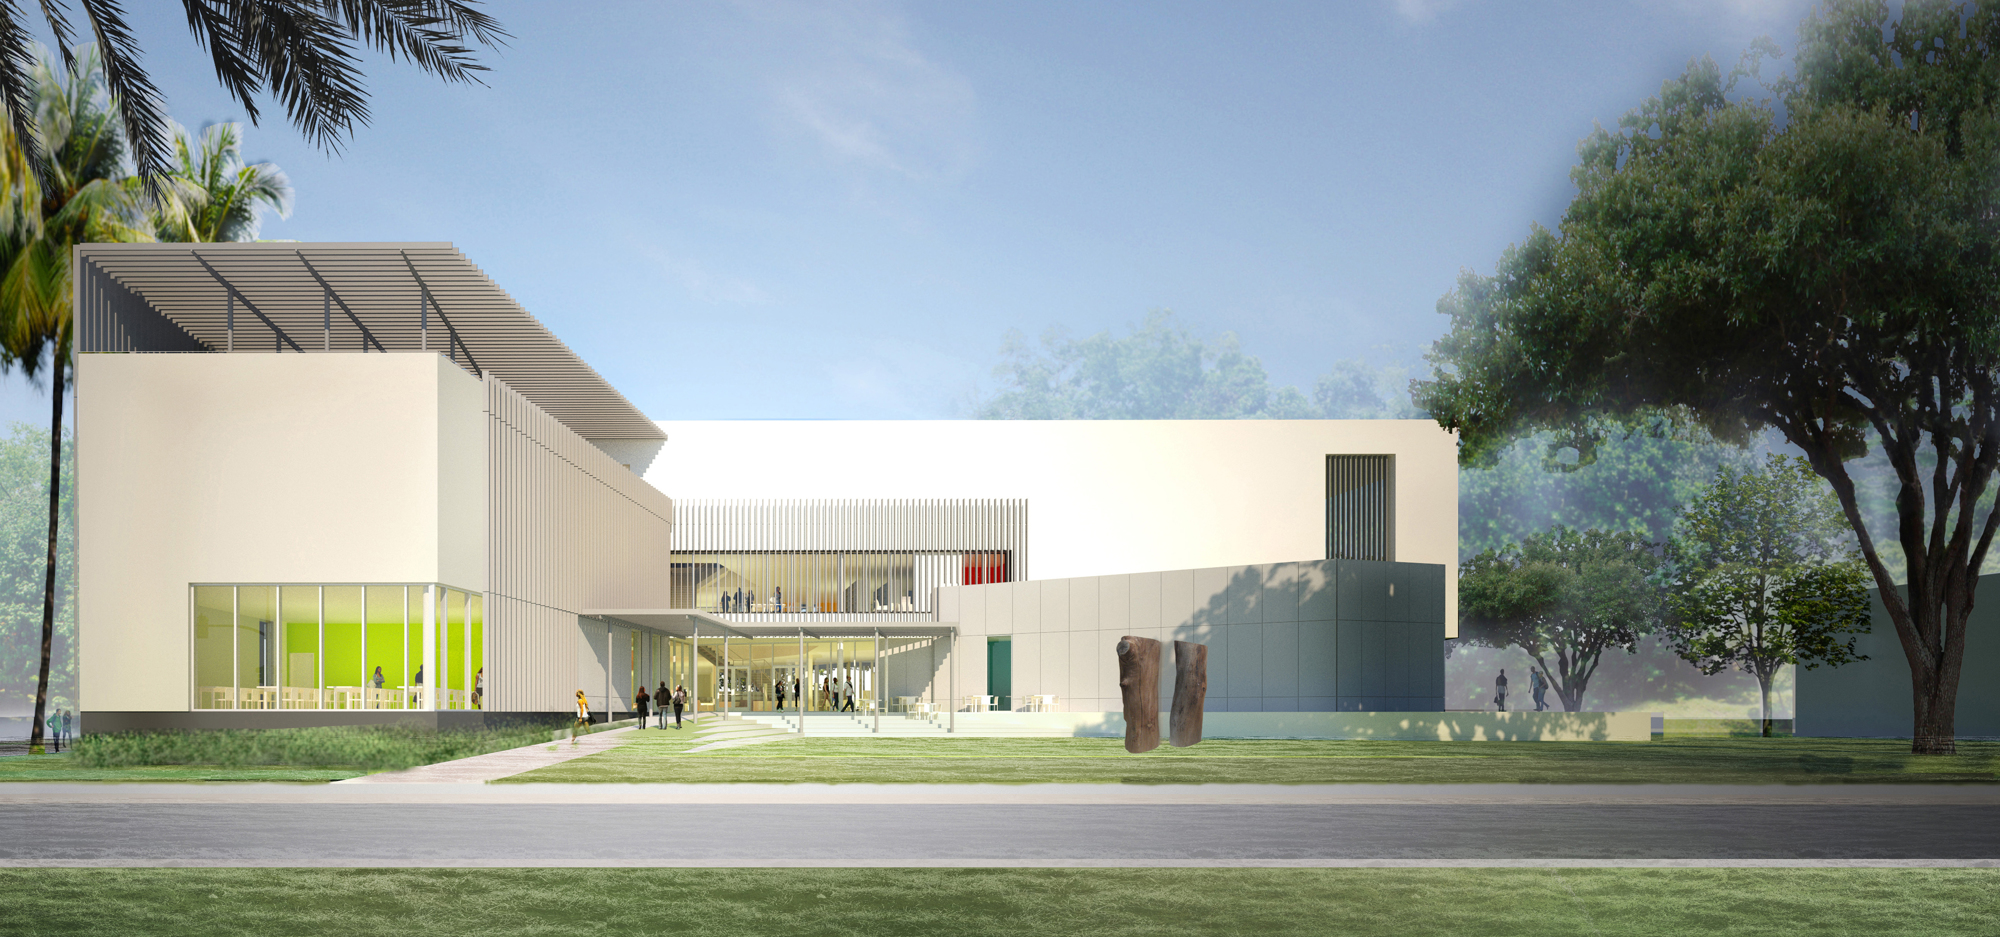 The public piece of art and the new library are slated to be completed by August 2016.